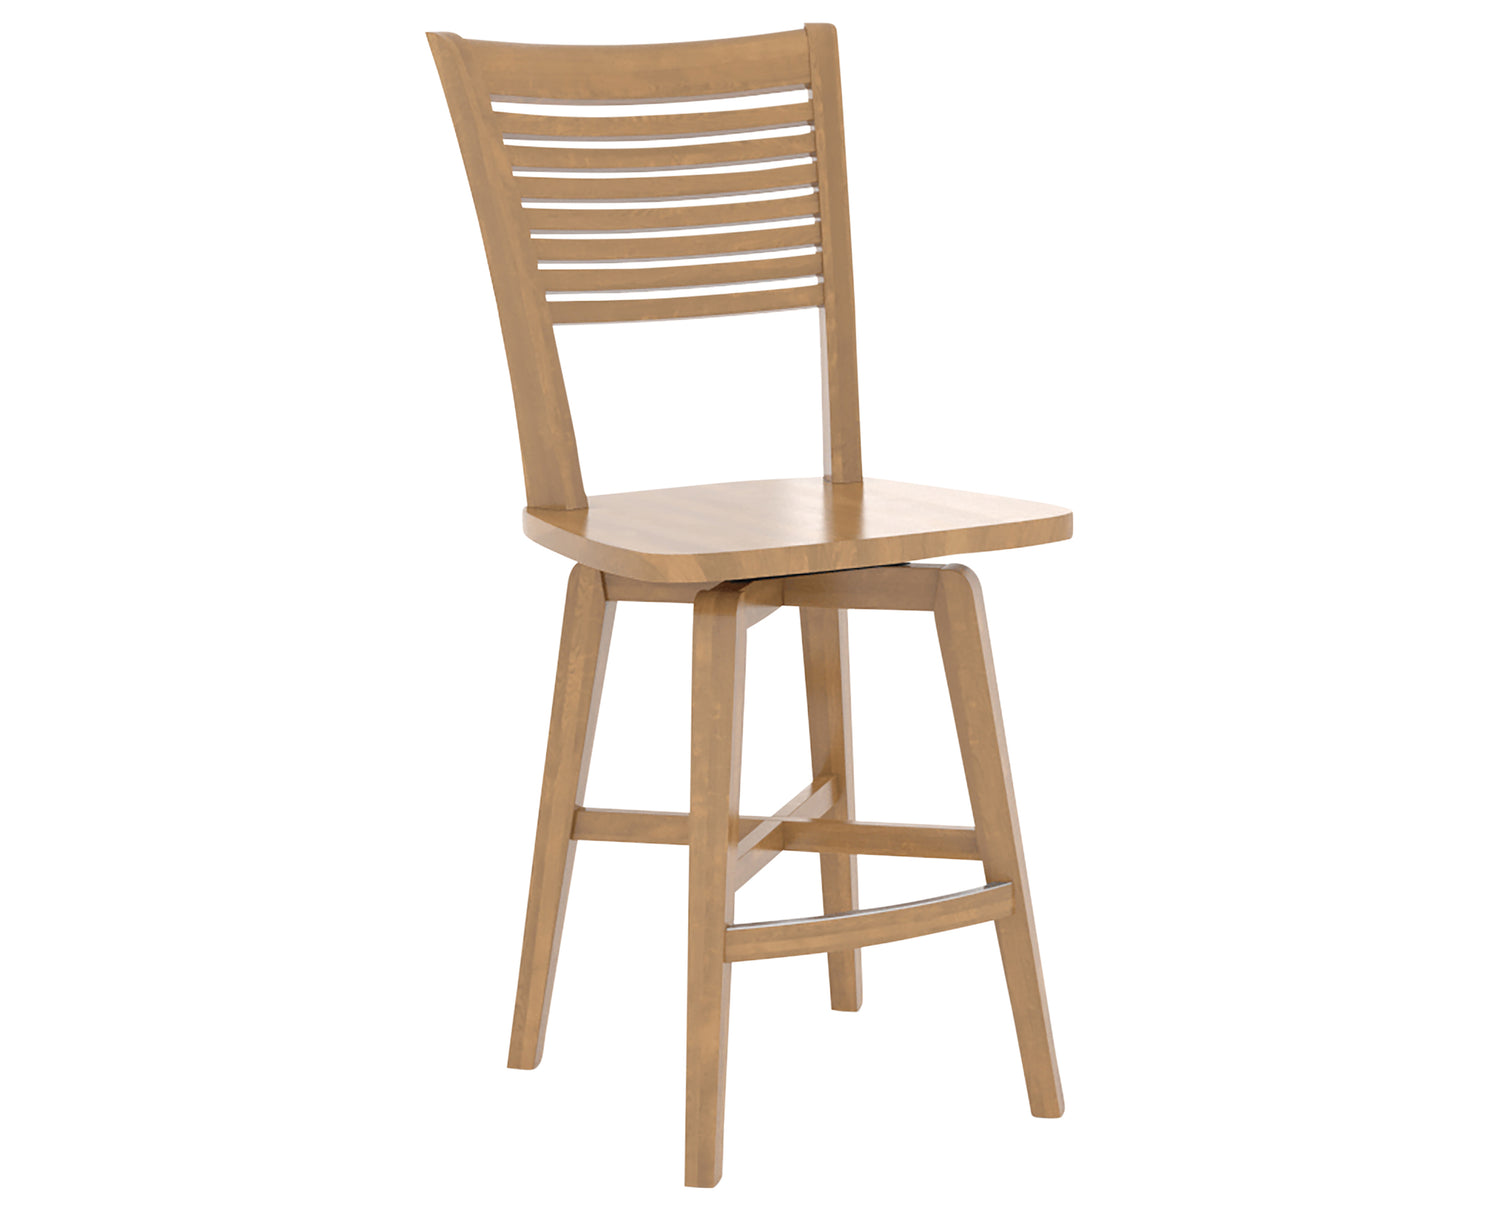 Honey Washed | Canadel Core Counter Stool 7229 | Valley Ridge Furniture